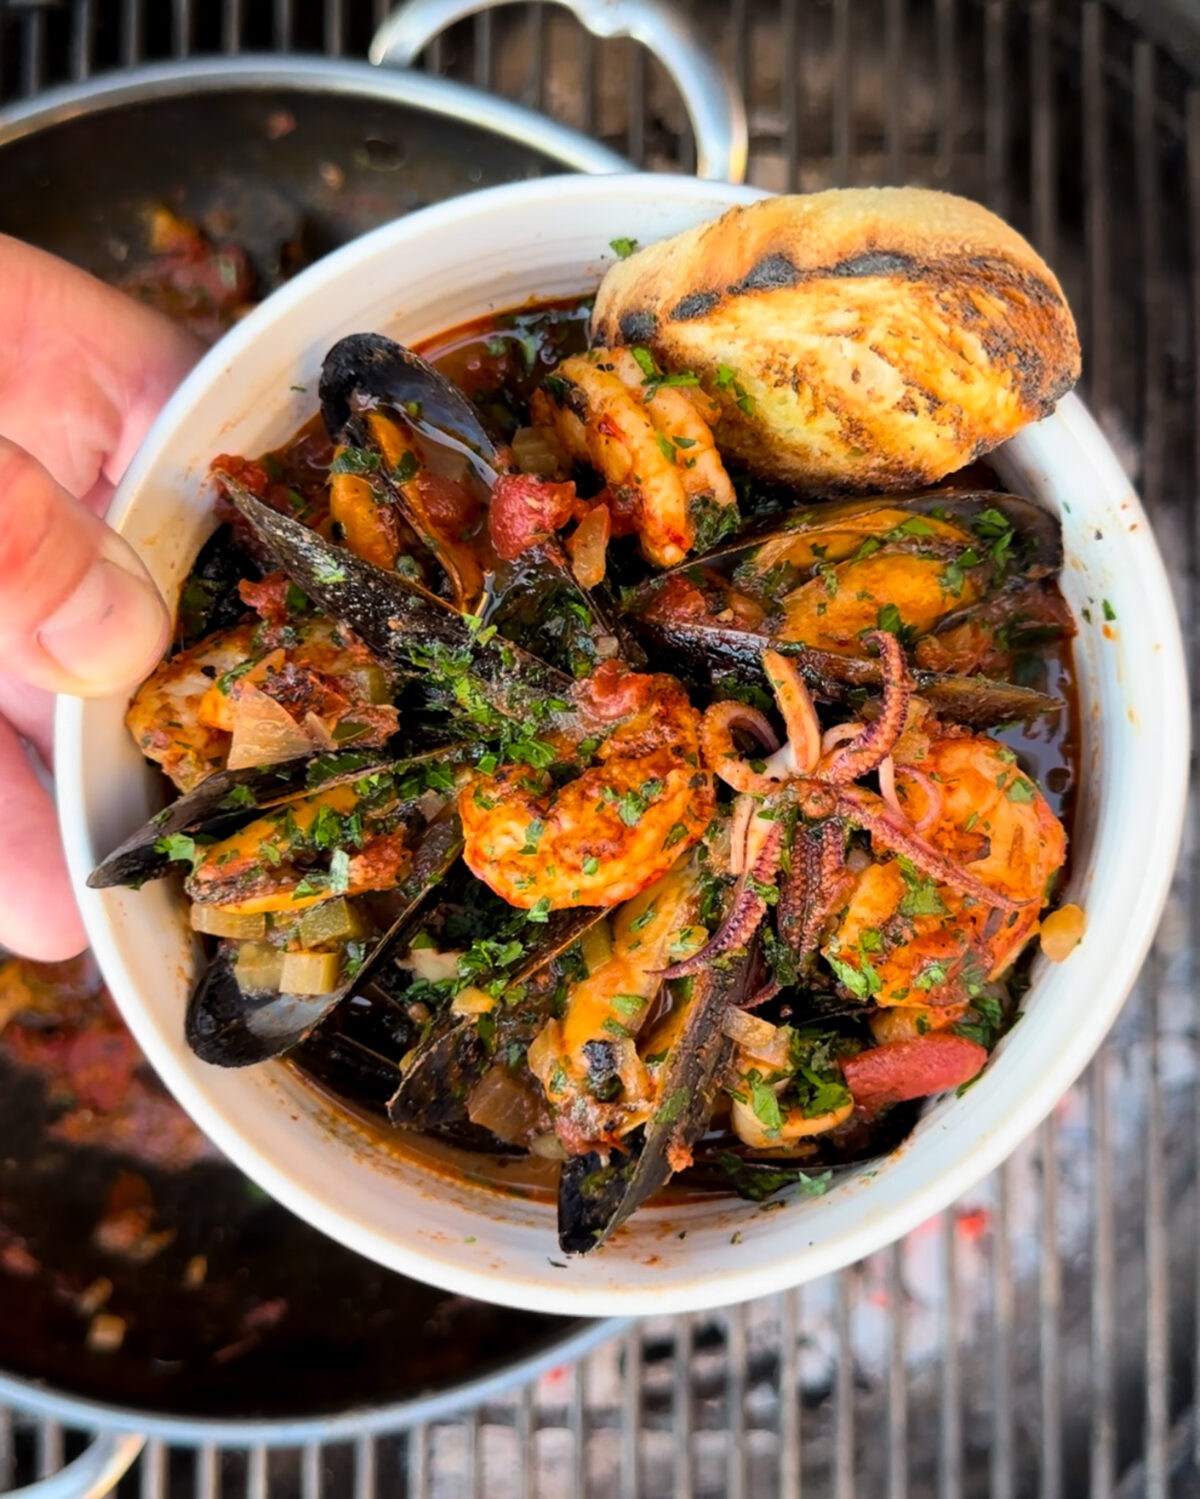 Serve mussels with grilled bread for dipping.